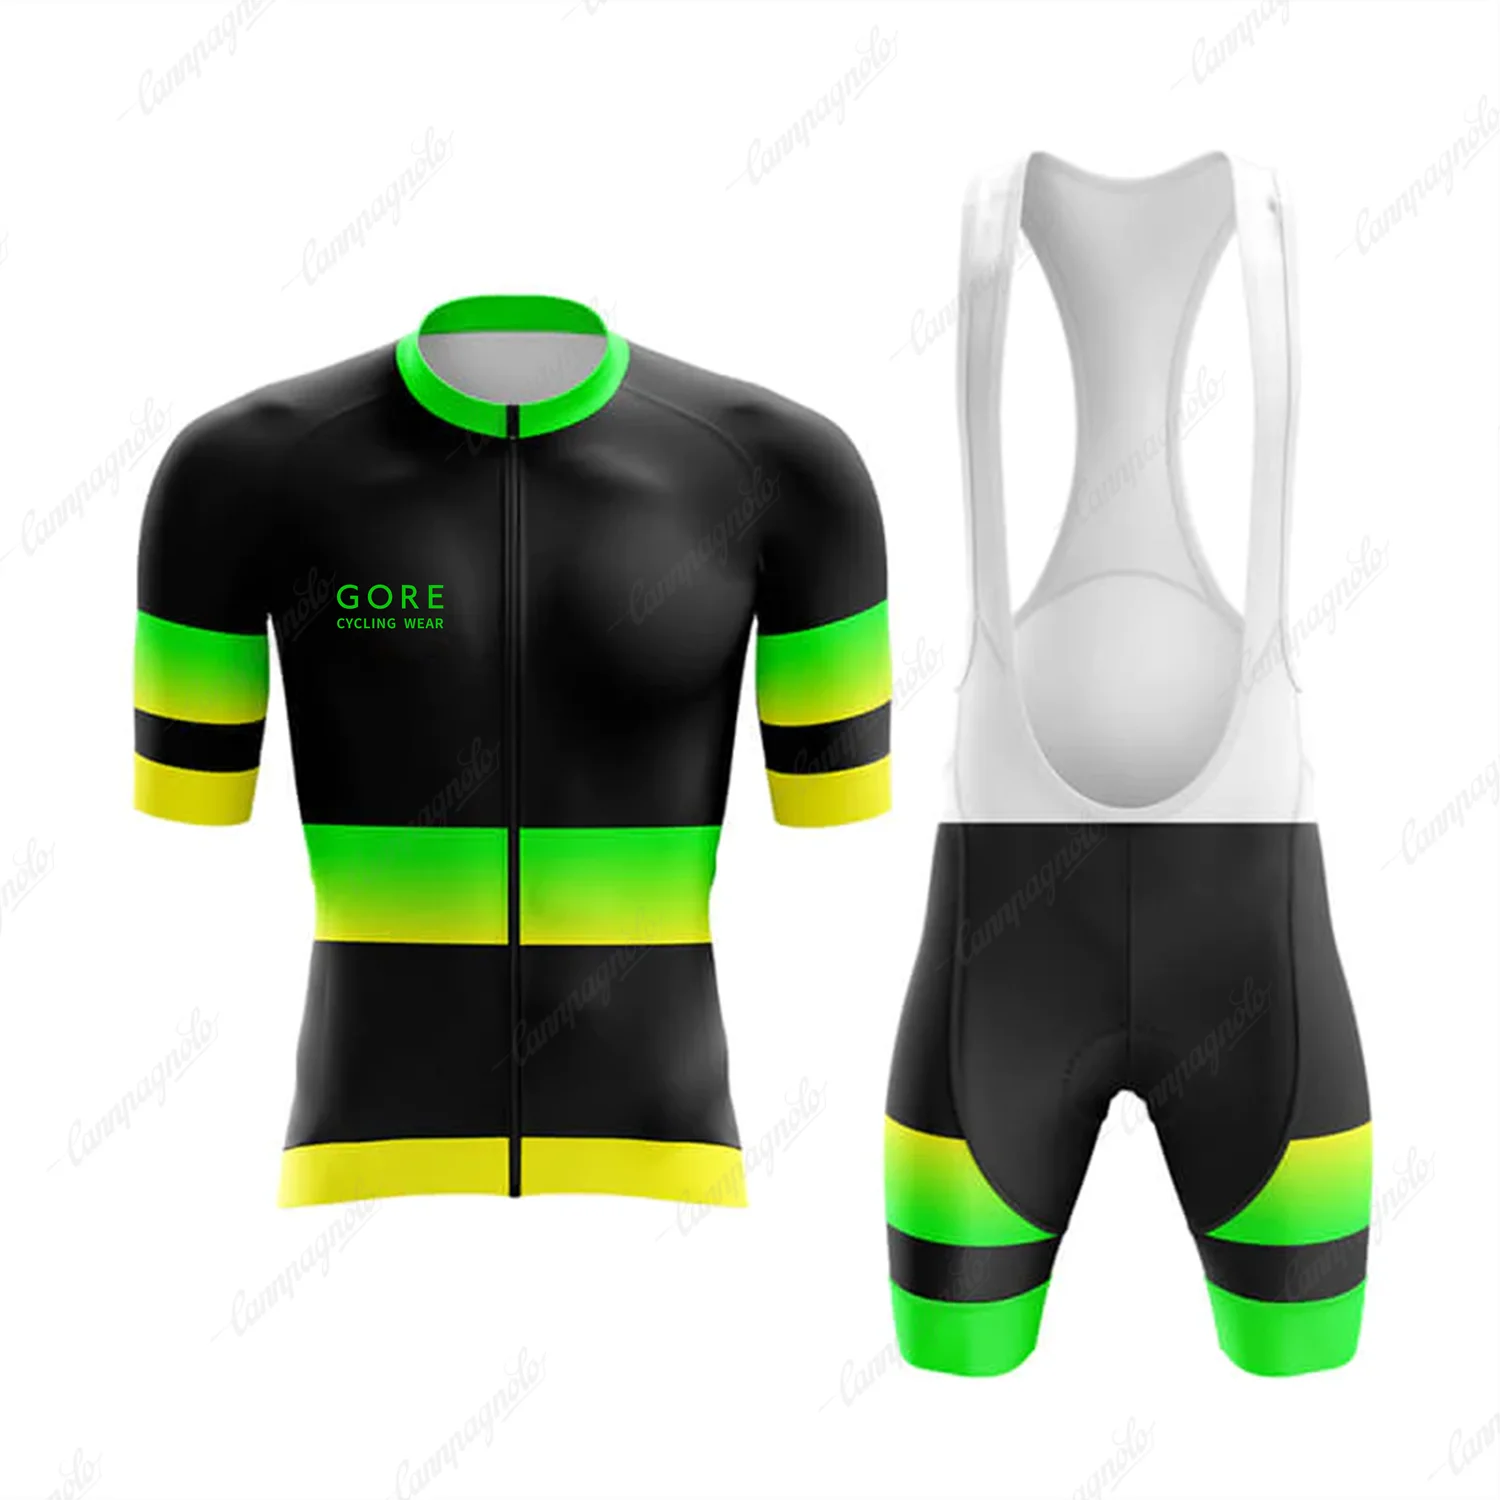 

GORE Cycling Wear Men Cycling Jersey Sets Quick Dry Breathable Cycling Clothing Summer Bicycle Shirts Suit MTB Maillot Ciclismo